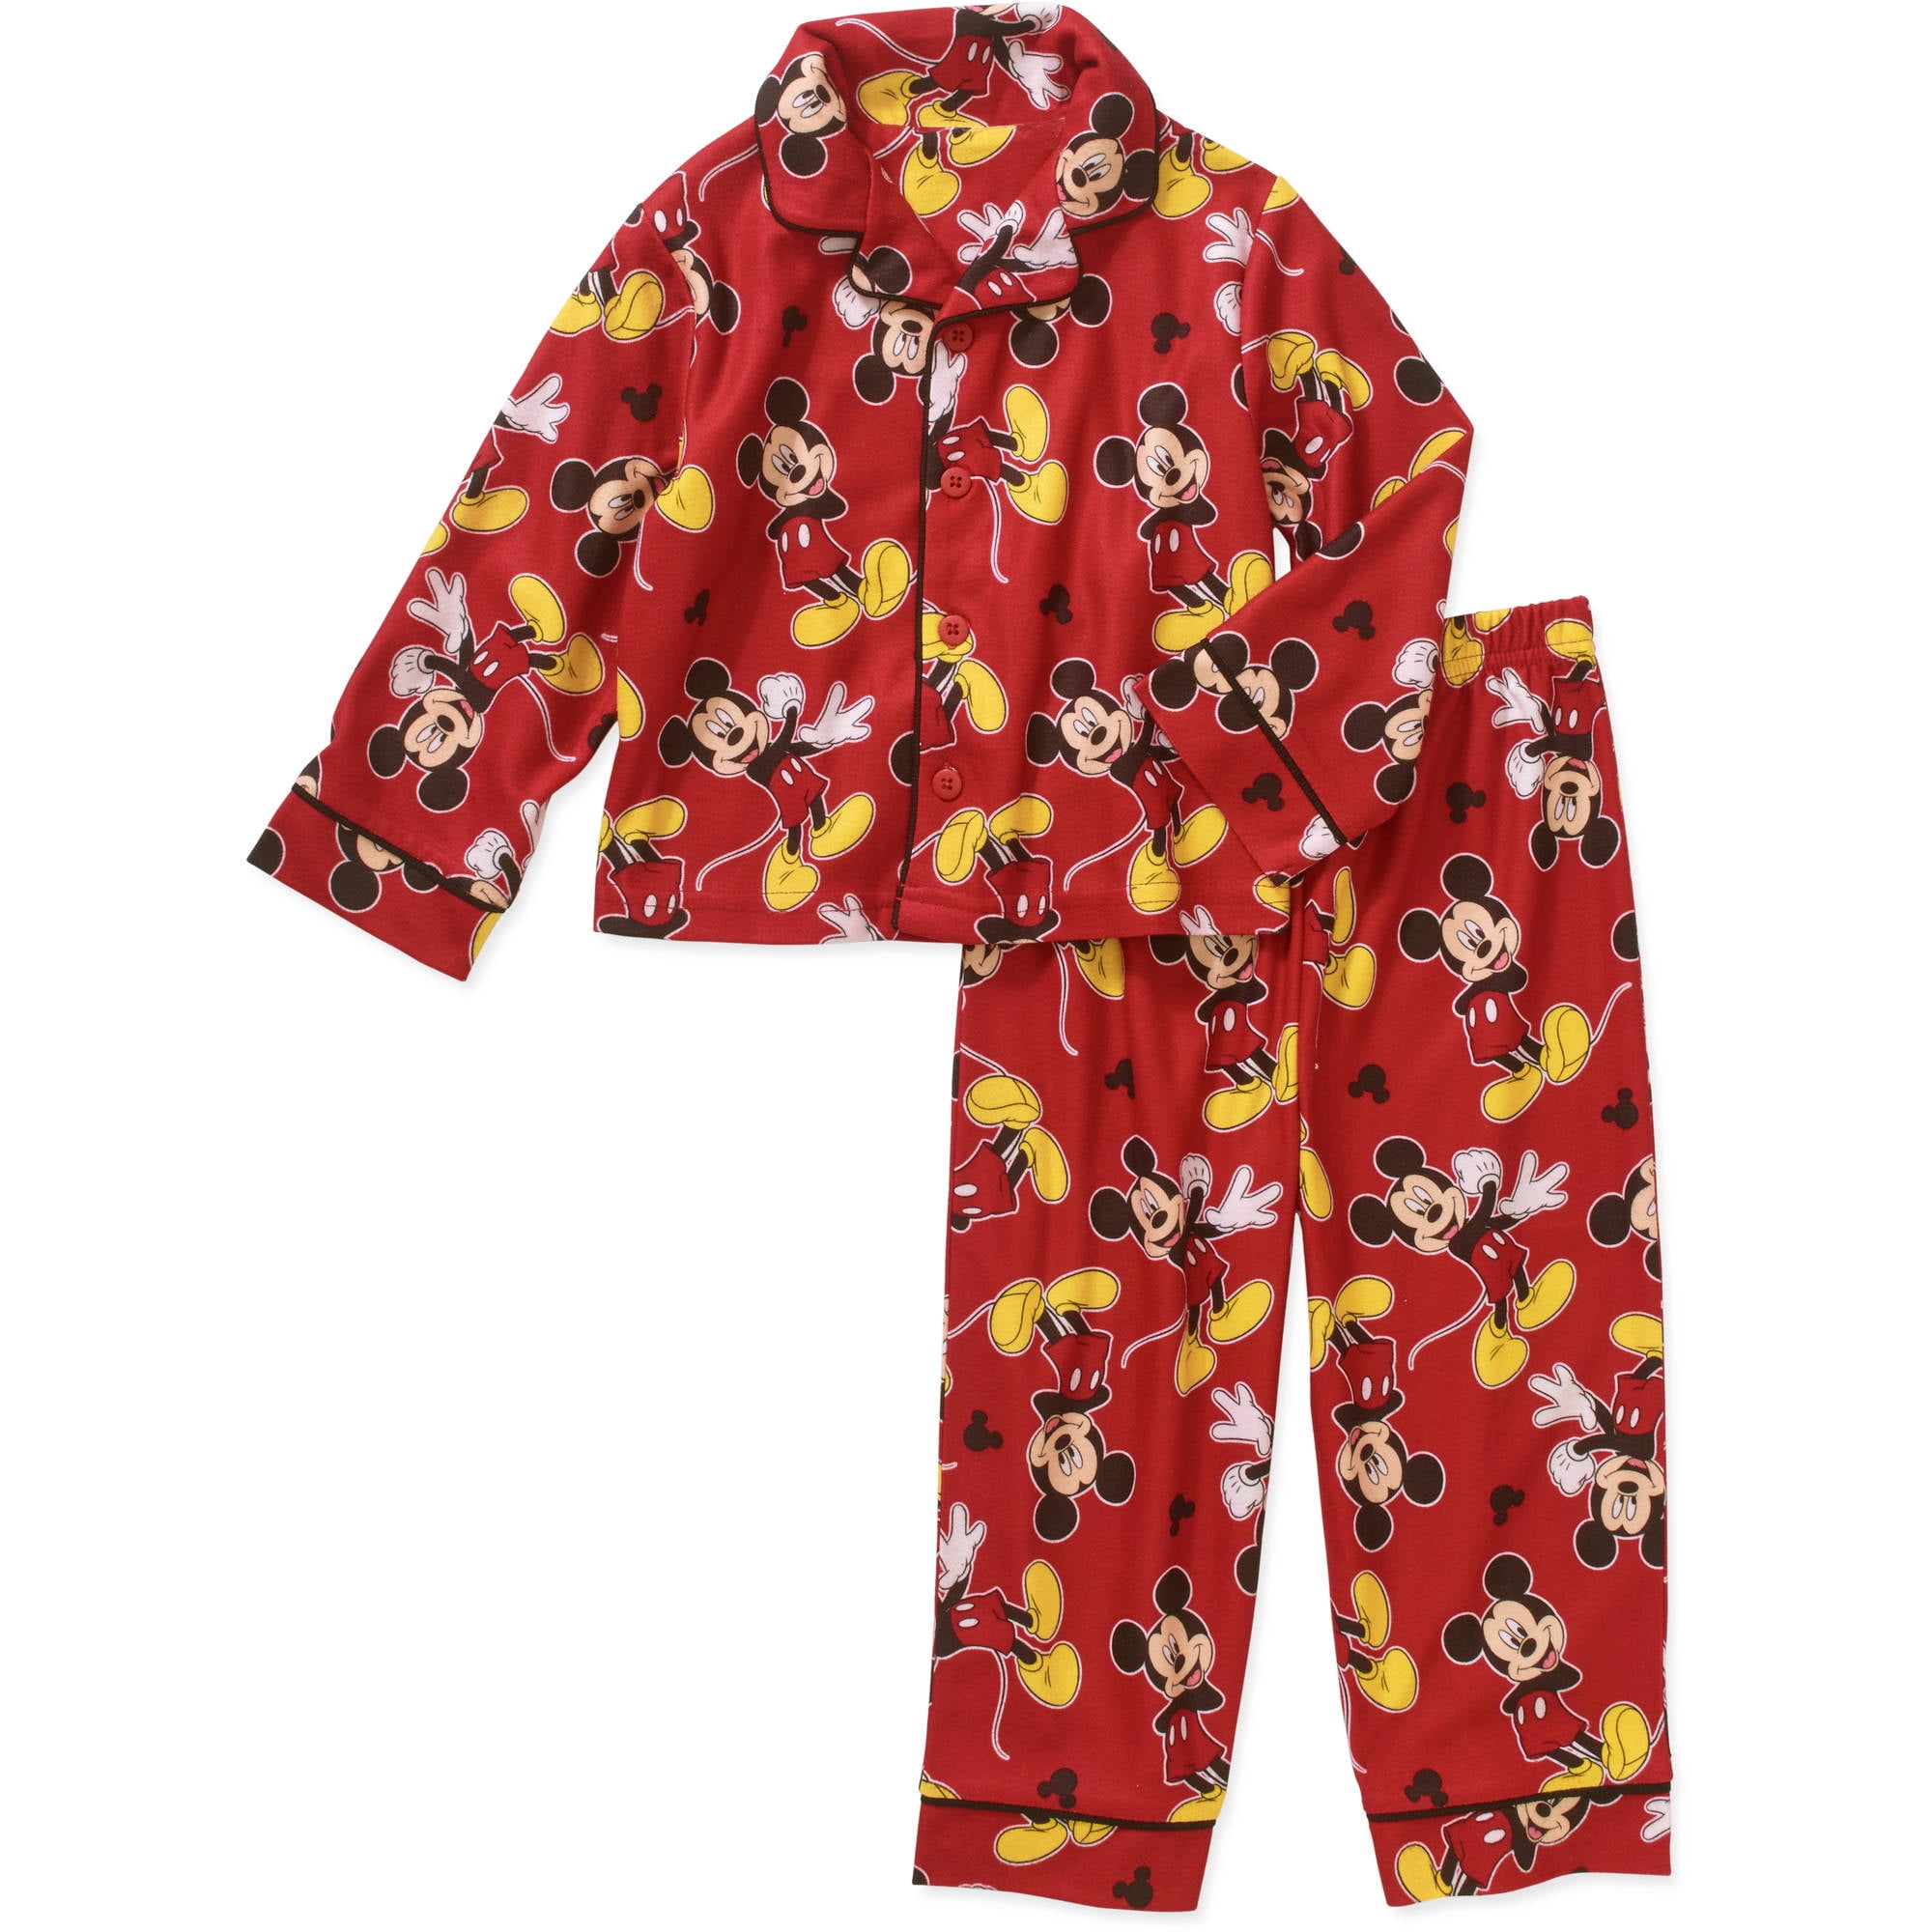 Details about   NEW Disney Jr Mickey Mouse boys 3T red flannel pajamas pjs 2 pc set sleepwear 